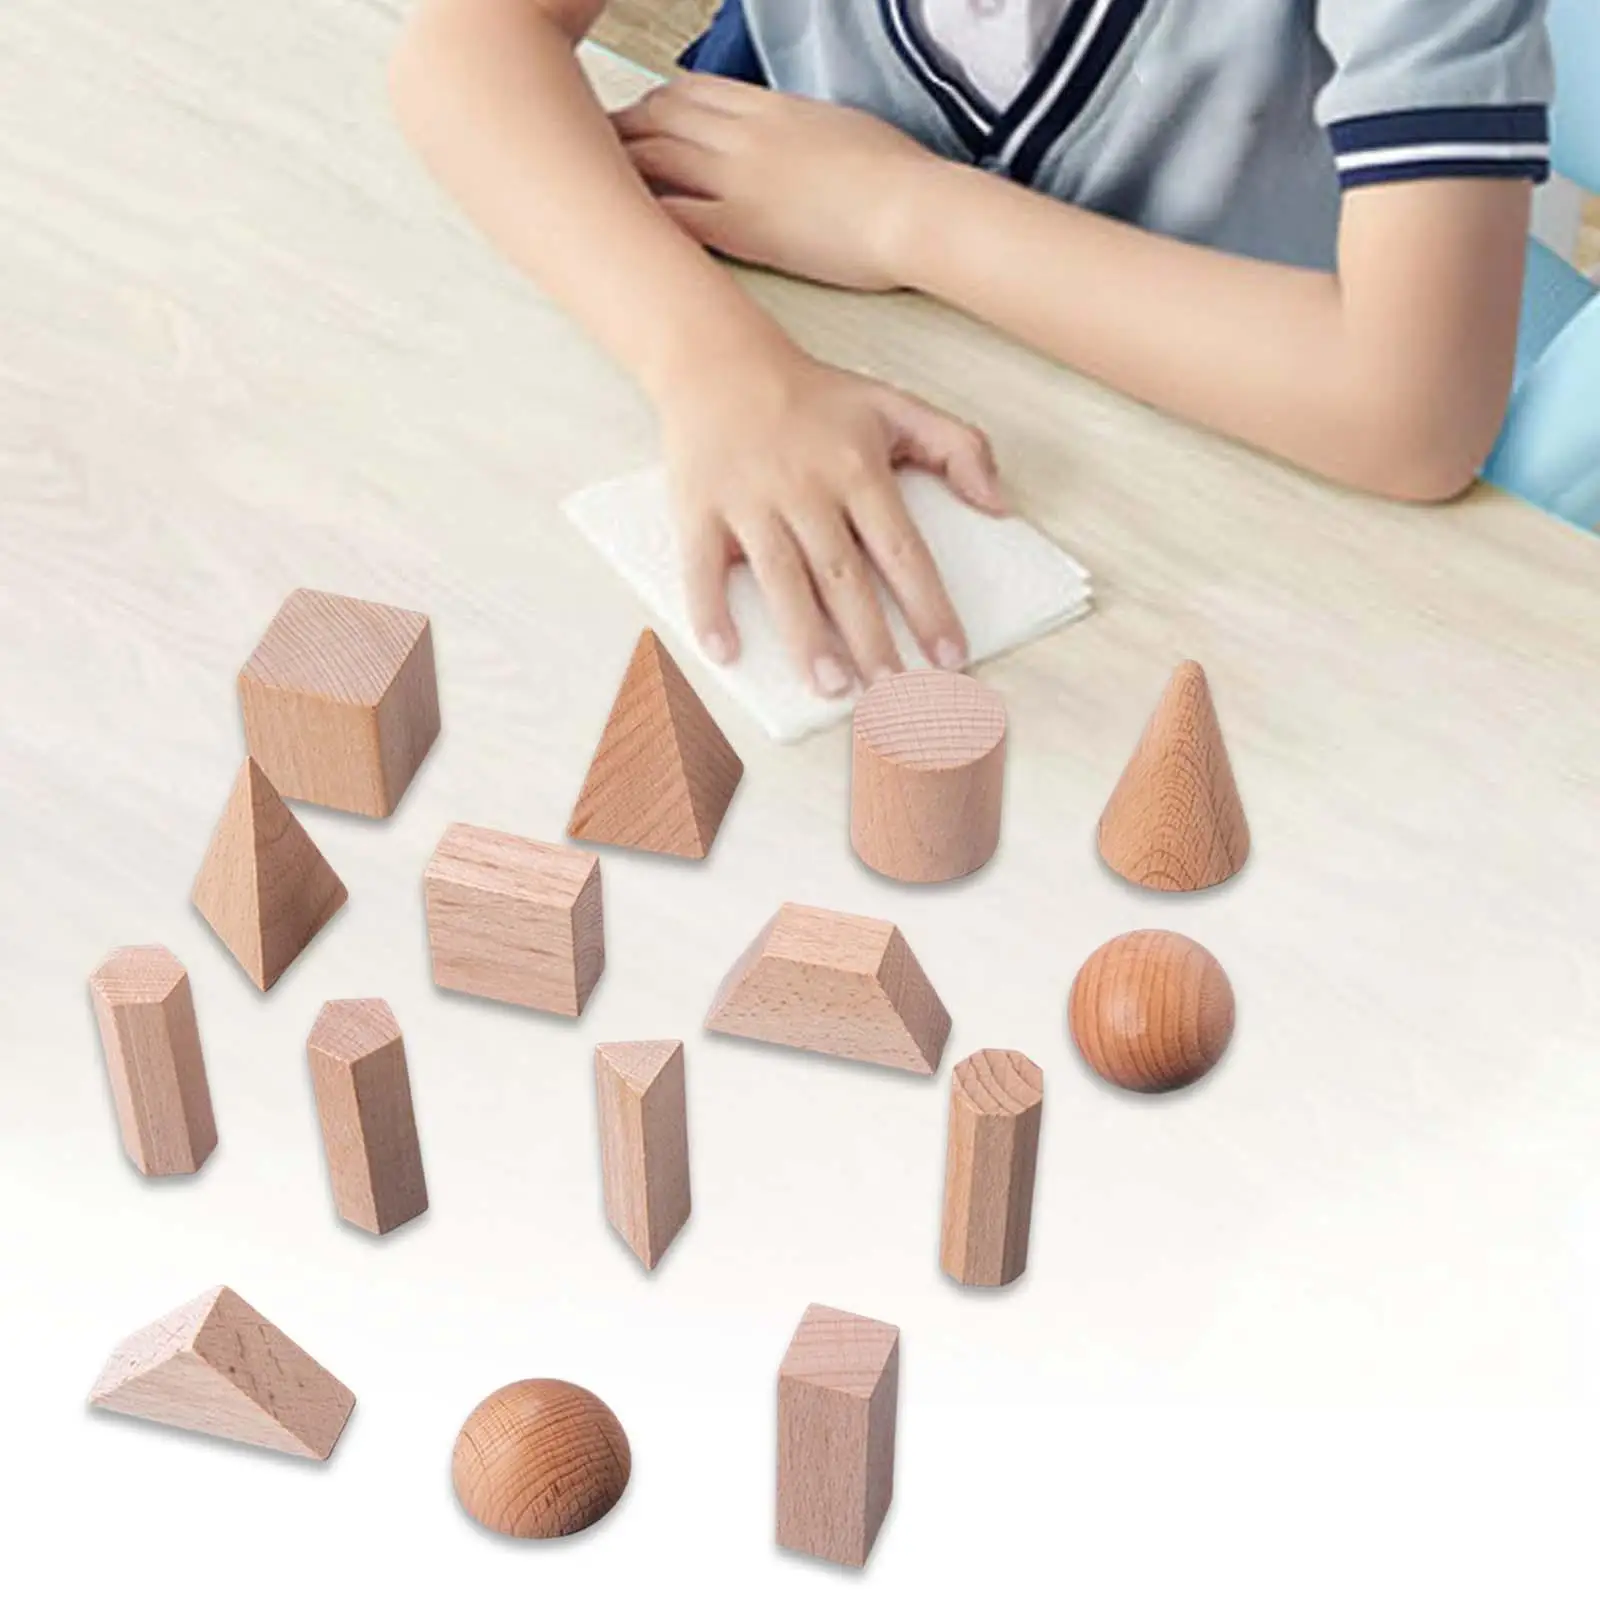 15 Pieces Wooden Geometric Solid Blocks,Educational Montessori Toys,3D Shapes Stacking Toy for Kids Ages 2+